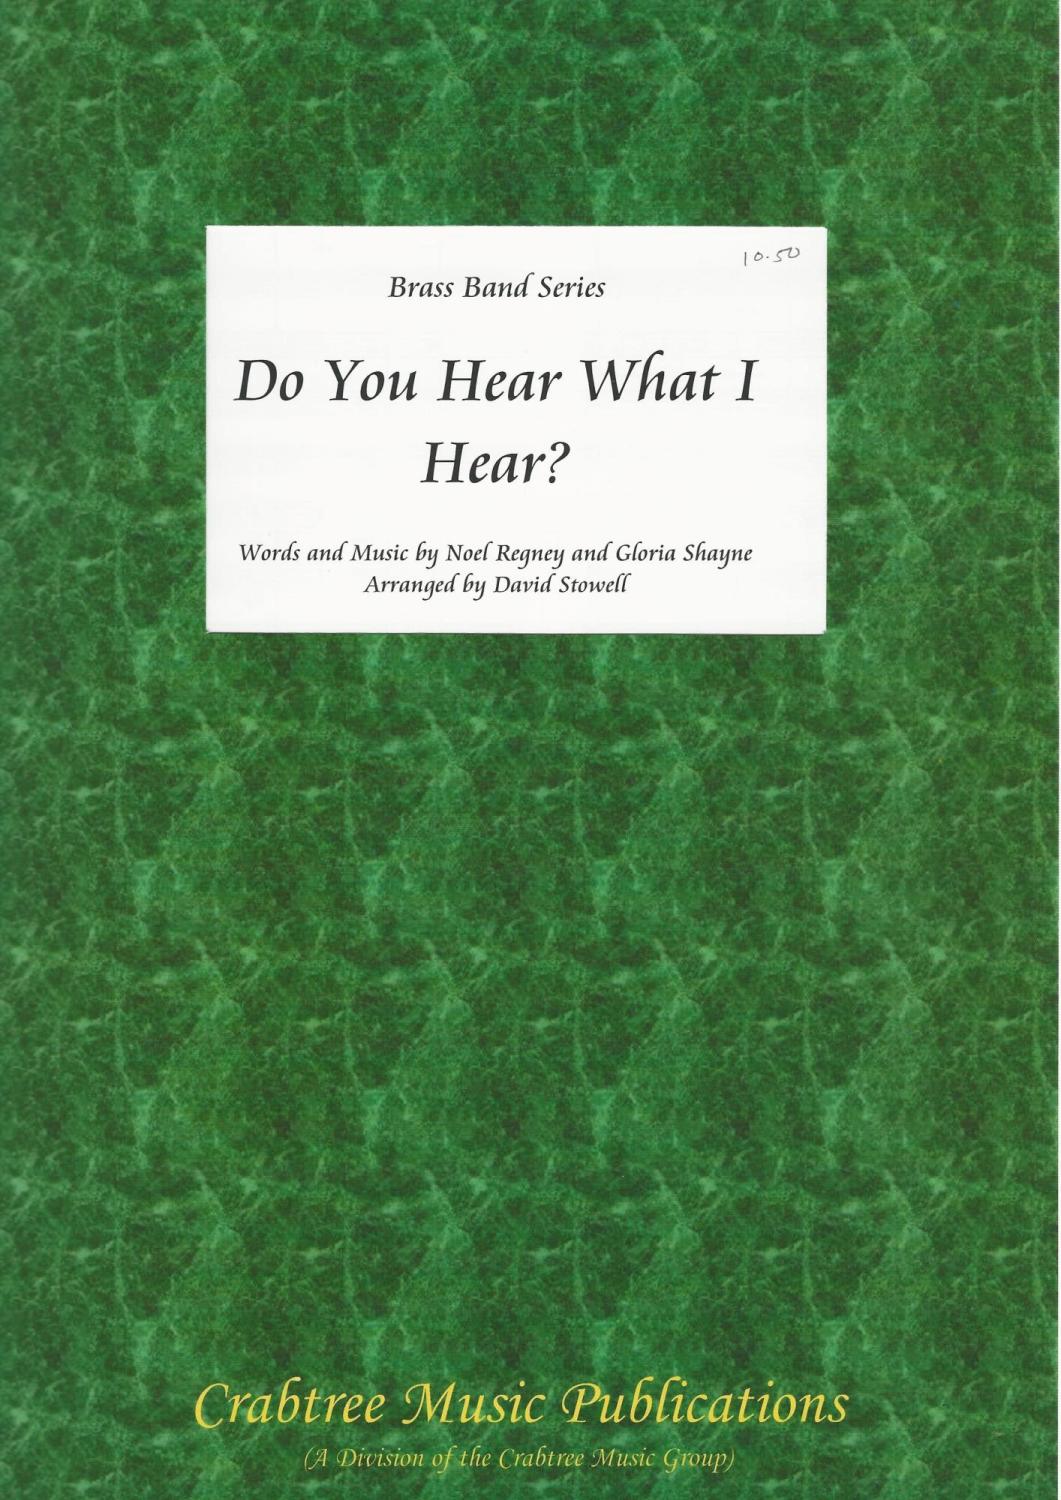 Do You Hear What I Hear? for Brass Band (Score Only) - Noel Regney/Gloria S